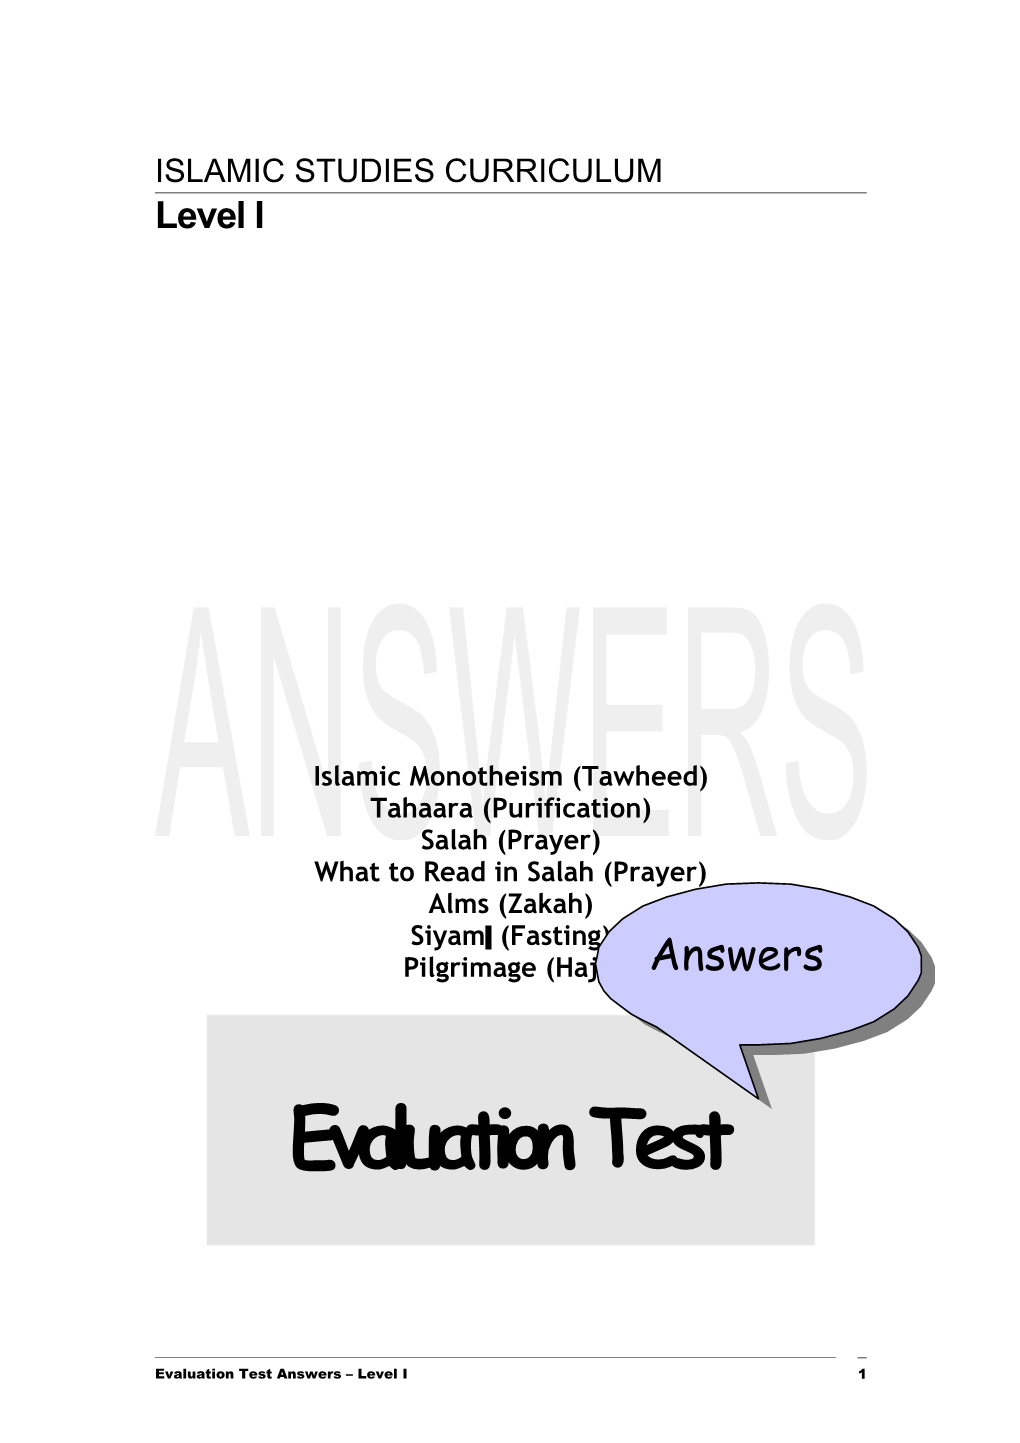 02 Evaluation Test Answers